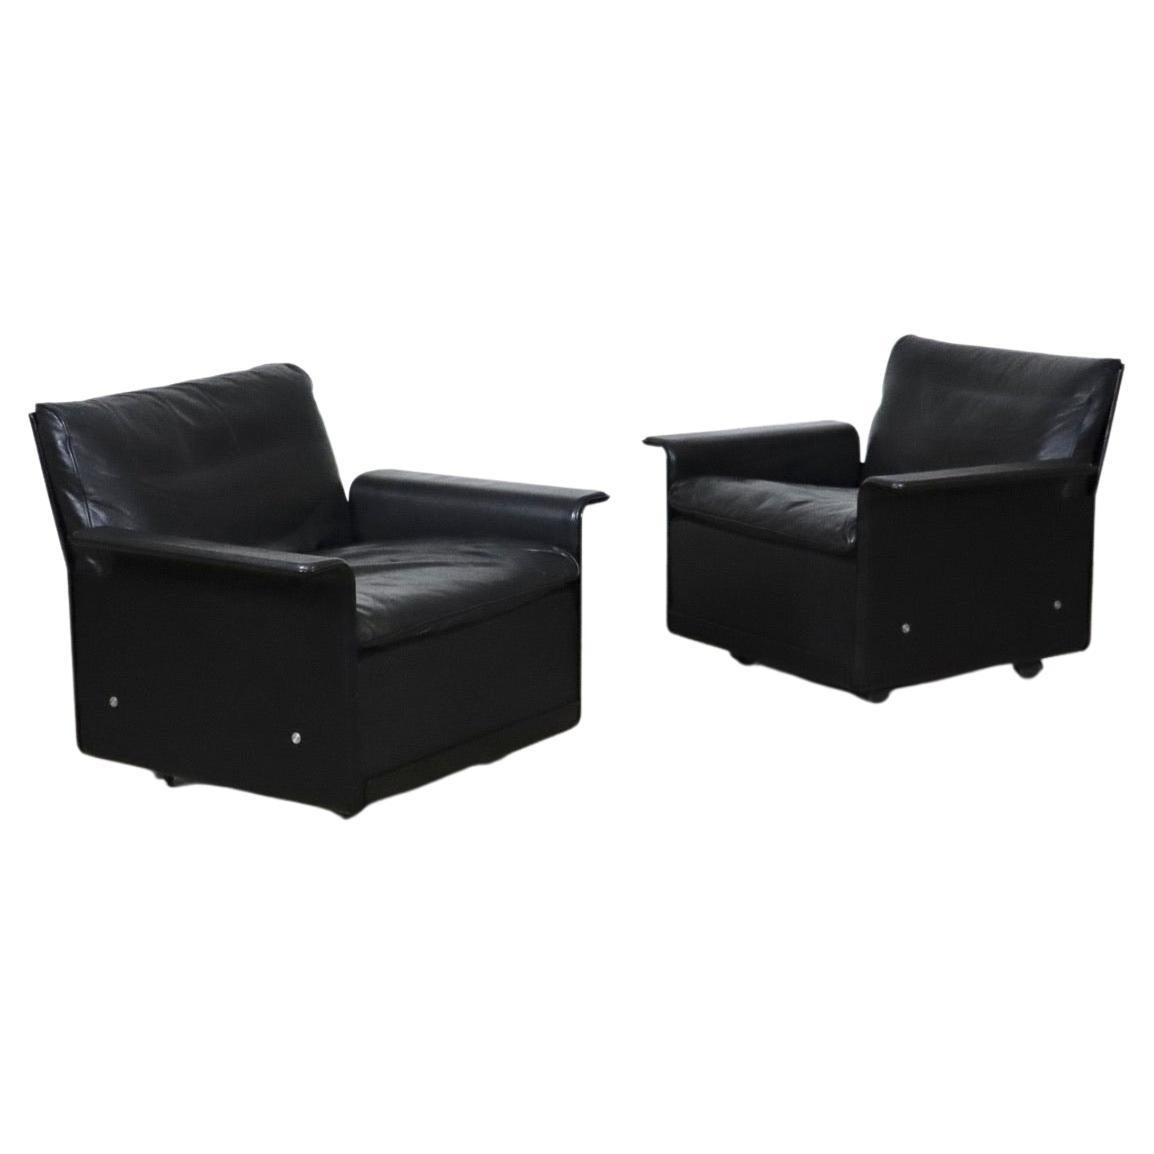 Pair Of Dieter Rams Model 620 Lounge Chairs In Black Leather For Vitsoe, 1980s